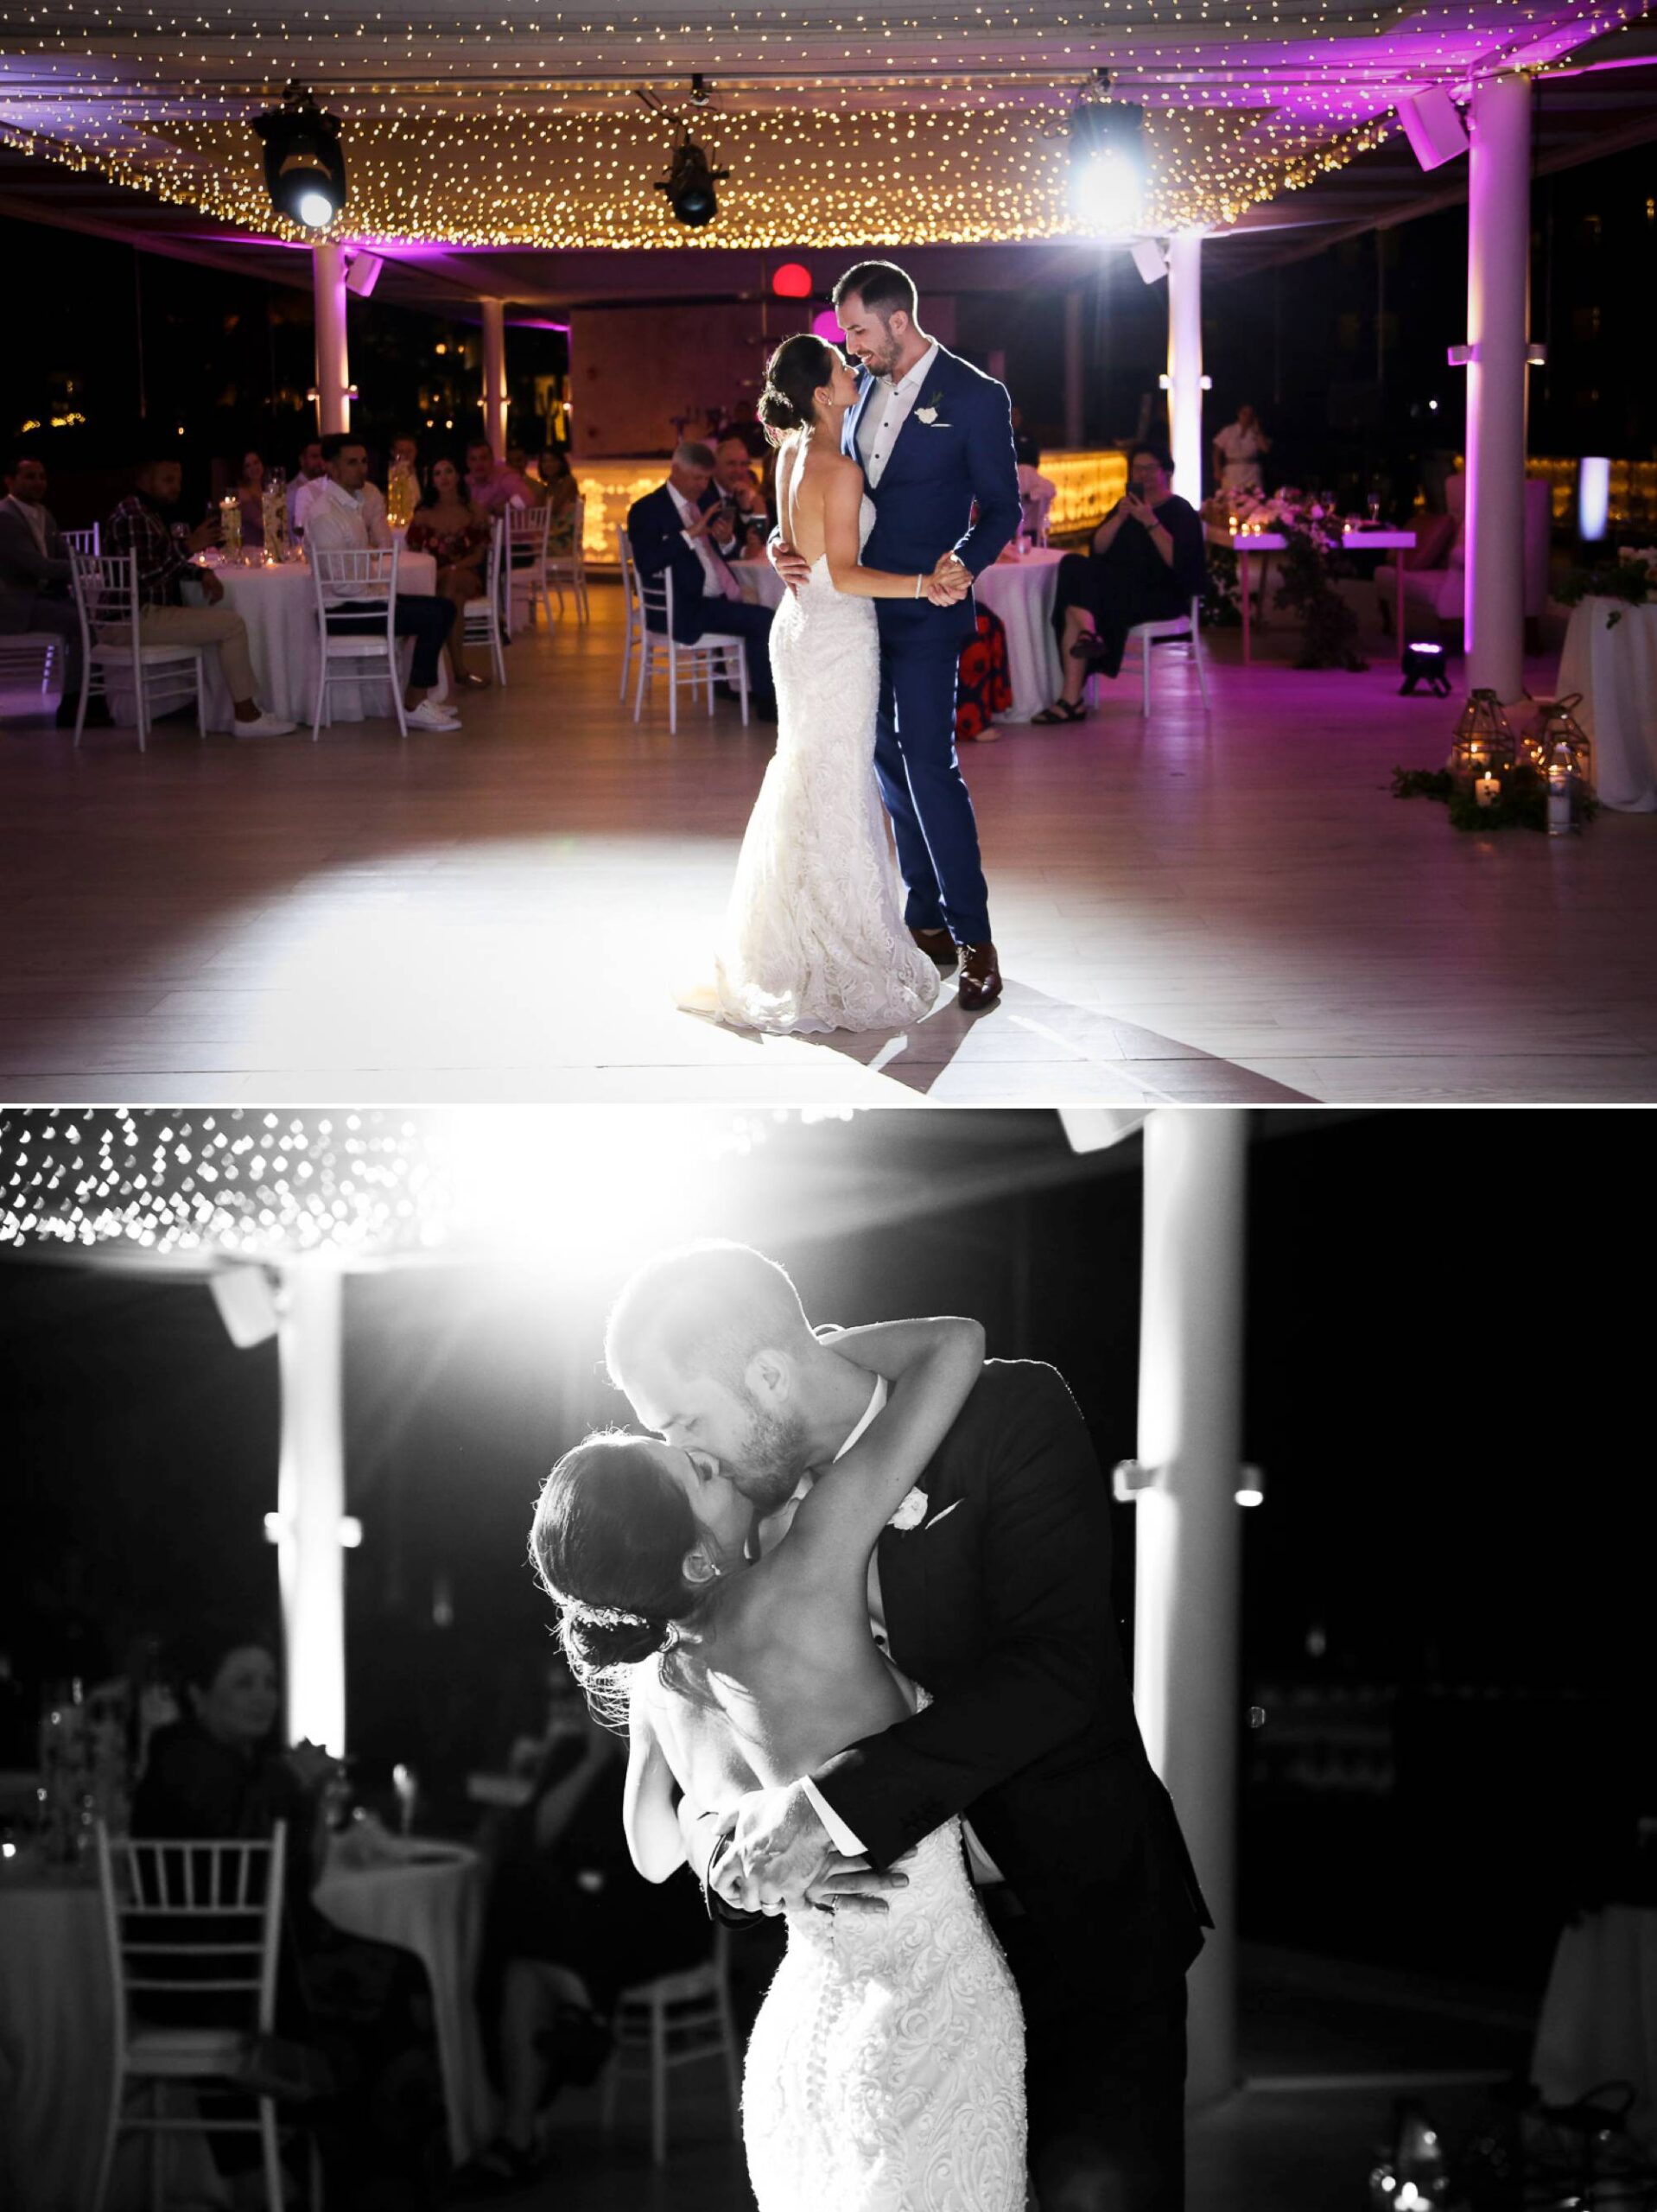 Bride and groom first dance, black and white kiss closeup during dance